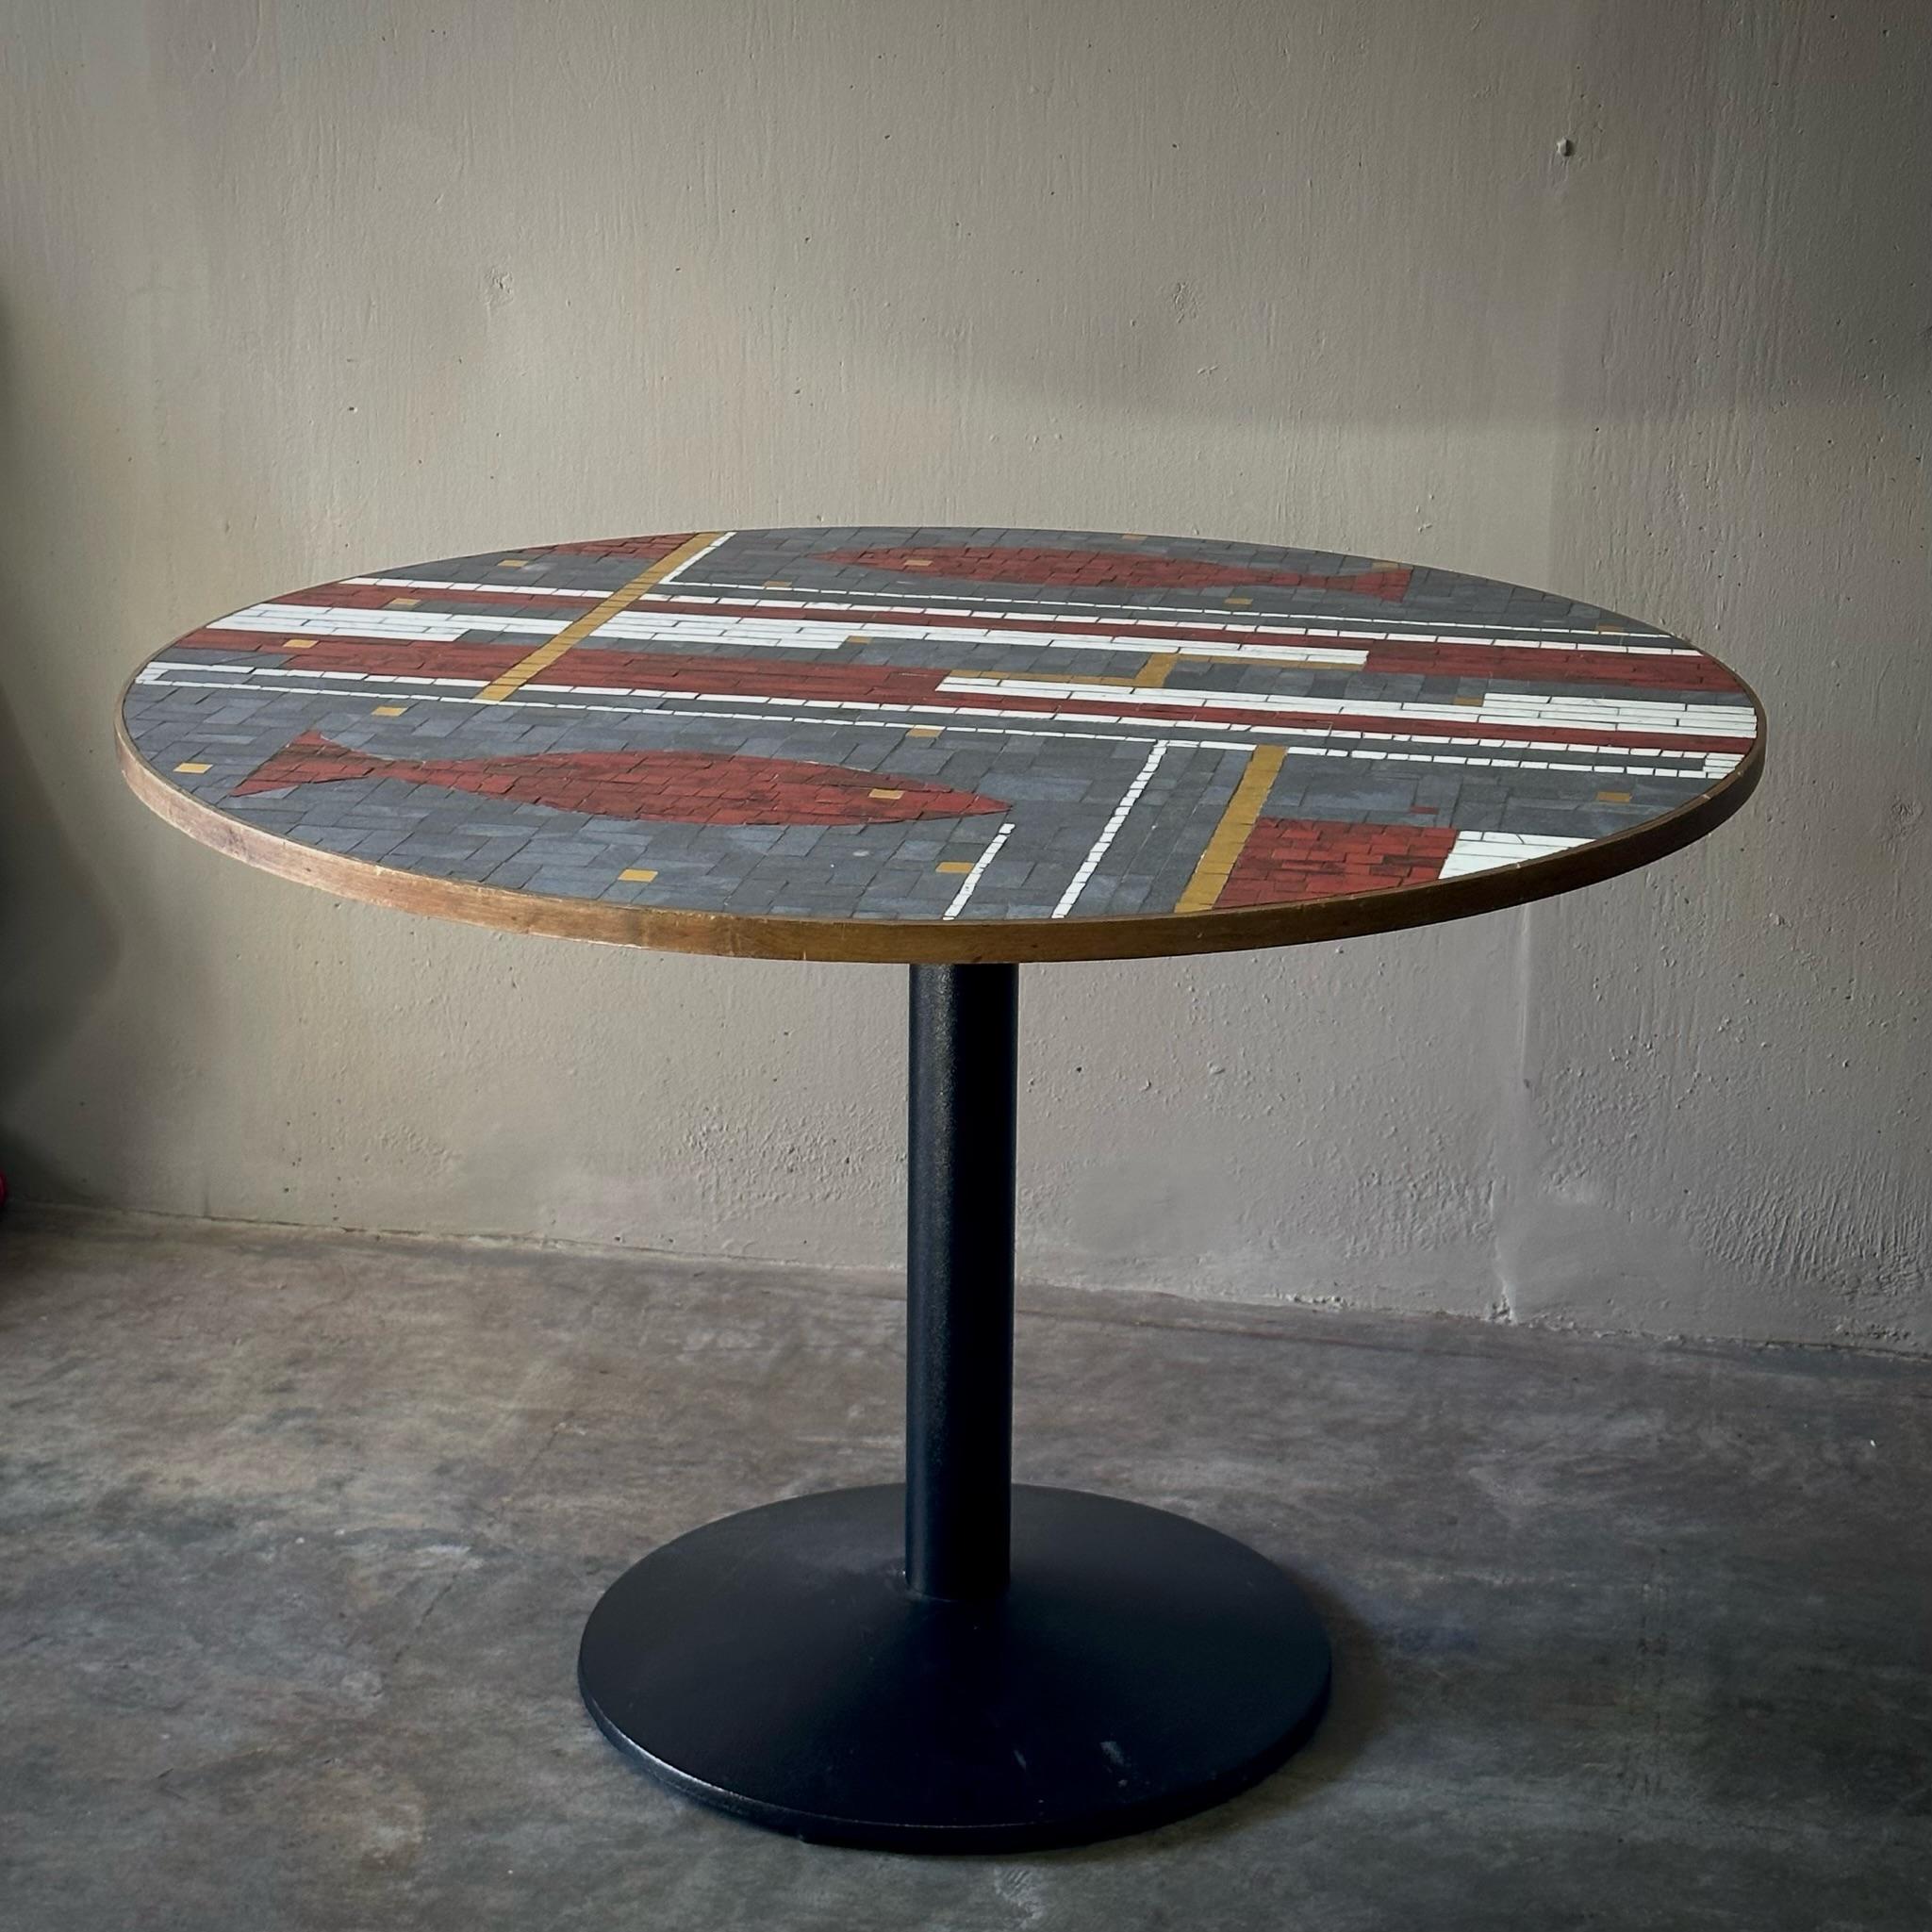 Whimsical 1960s Dutch circular mosaic table featuring graphic Mondrian-like design with fish motif in tiles of gray, red, yellow, and white. Mounted on a simple industrial iron pedestal base, this unique midcentury dining or center table would work